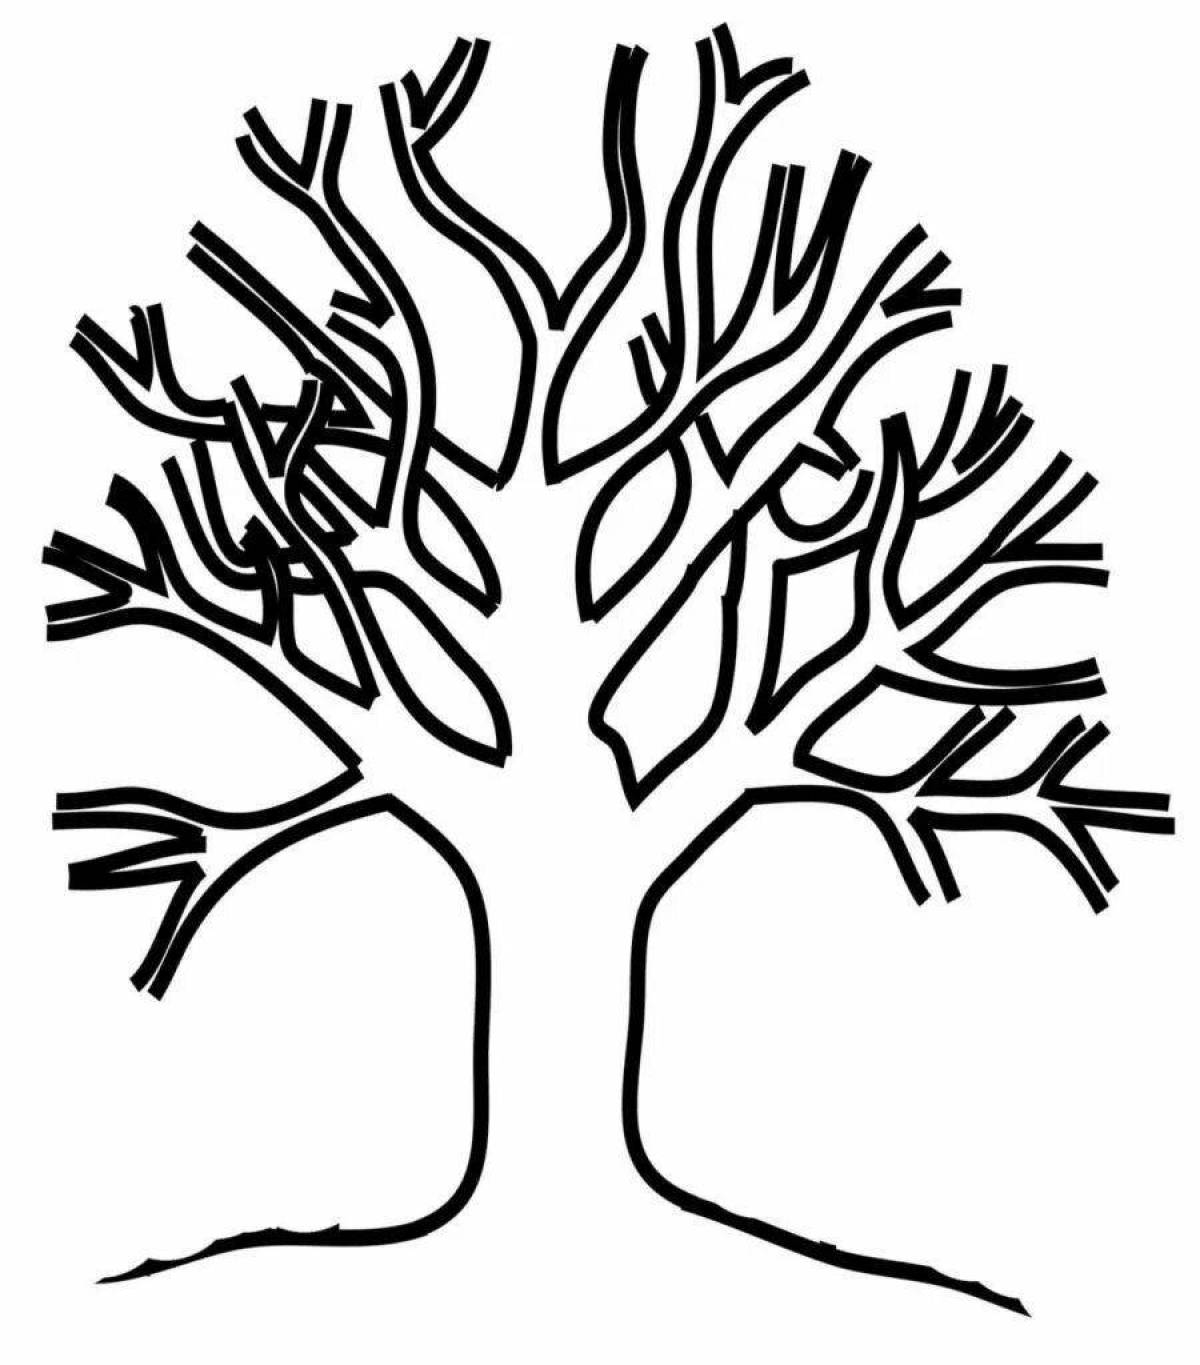 Coloring live branchy tree